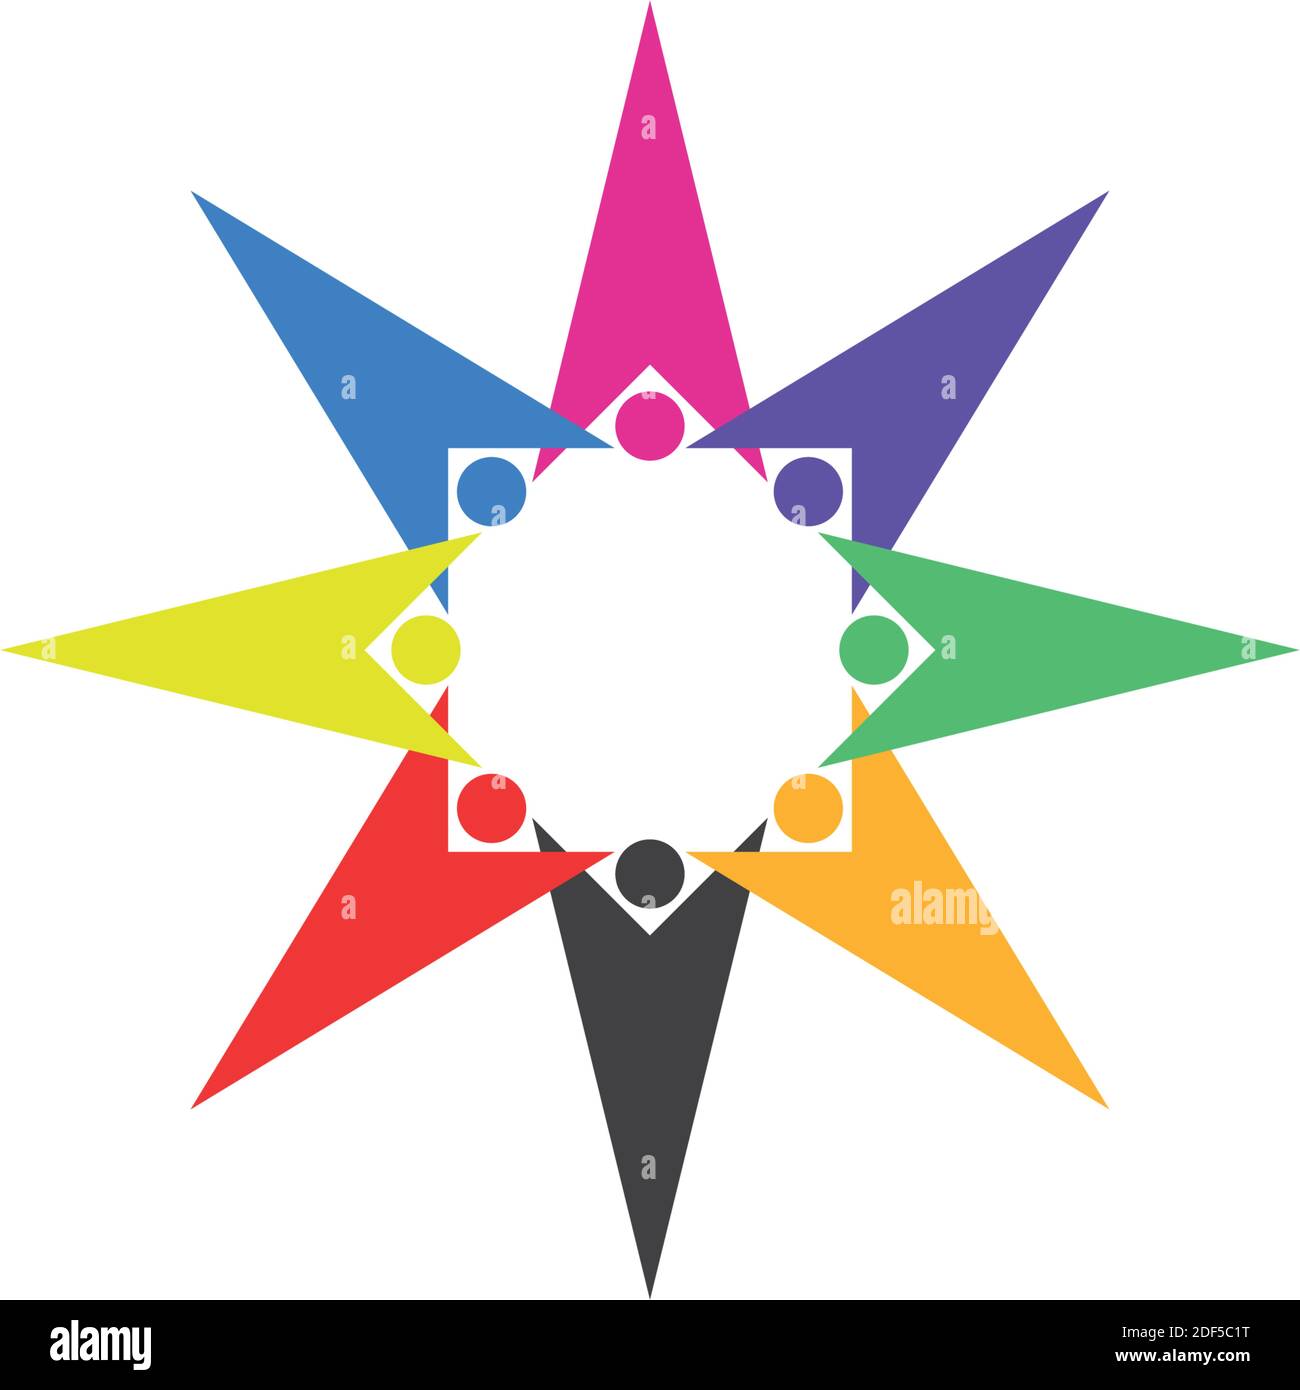 colorful people team star shape logo icon Stock Vector